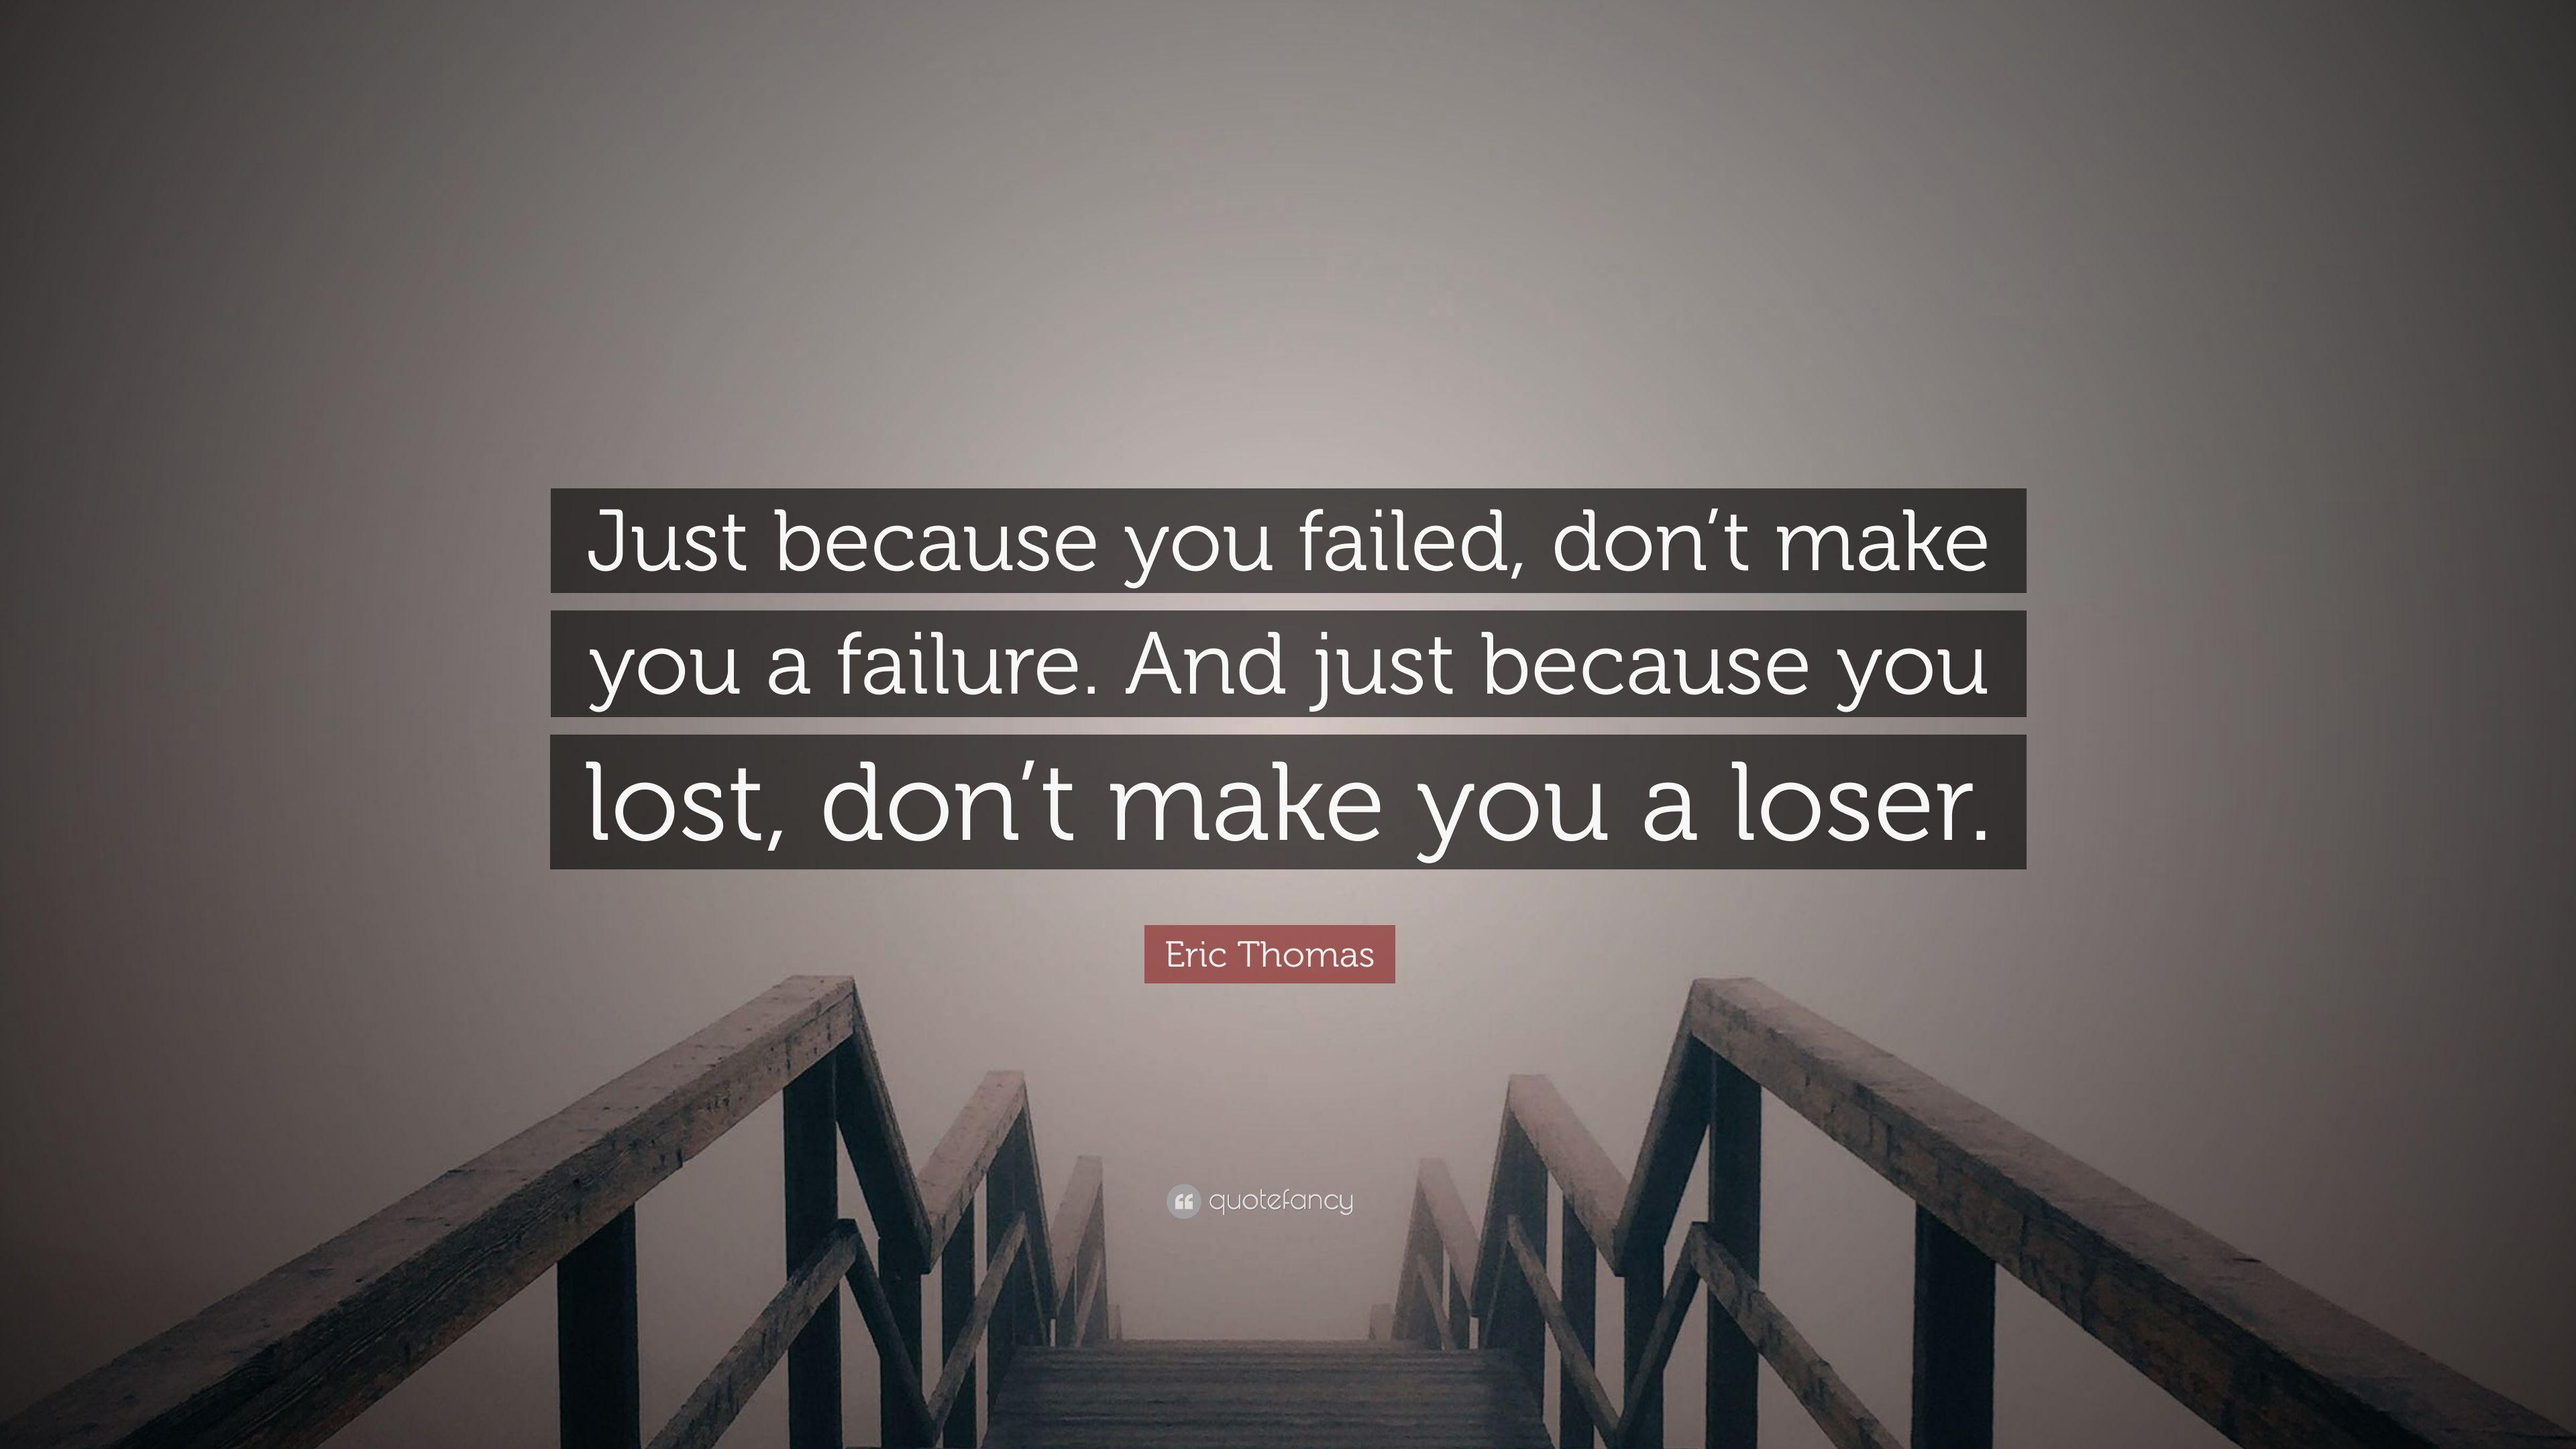 Eric Thomas Quote: “Just because you failed, don't make you a